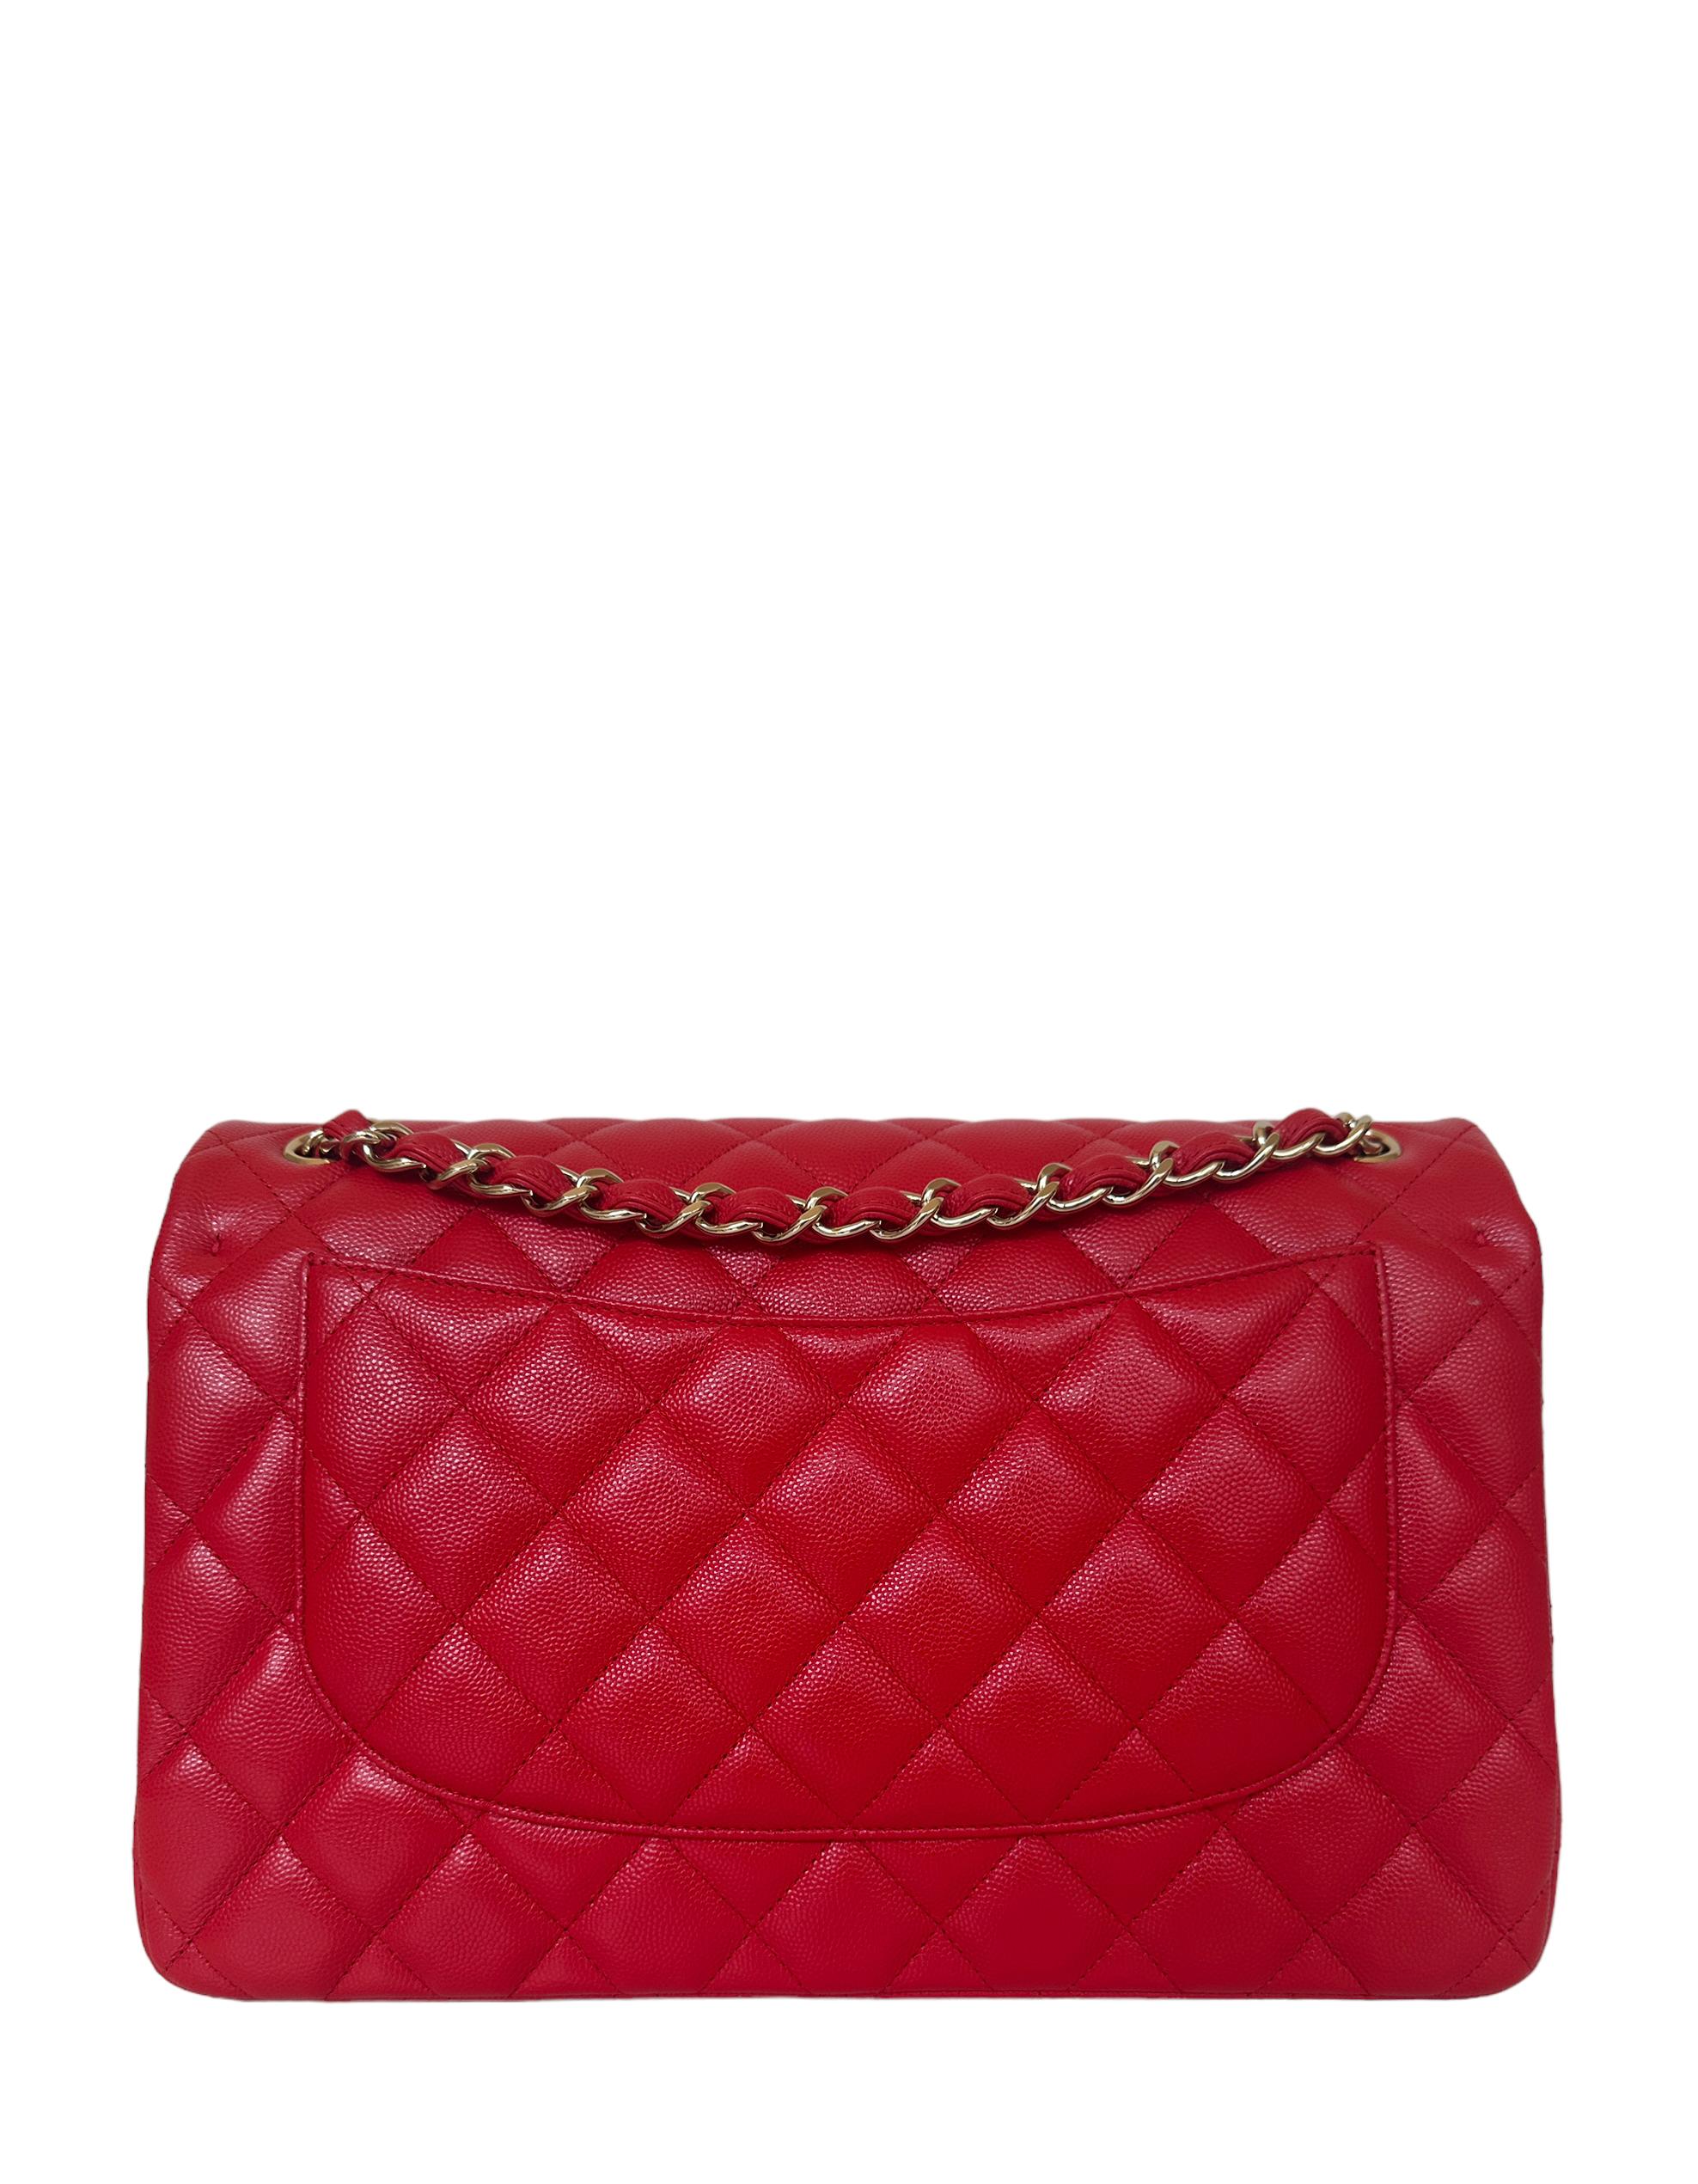 Chanel Red Caviar Leather Quilted Classic Double Flap Jumbo Bag. Glazed caviar leather adds a shine to the rich red color

Made In: Italy
Year of Production: 2021
Color: Red 
Hardware: Goldtone
Materials: Glazed caviar Leather
Lining: Red